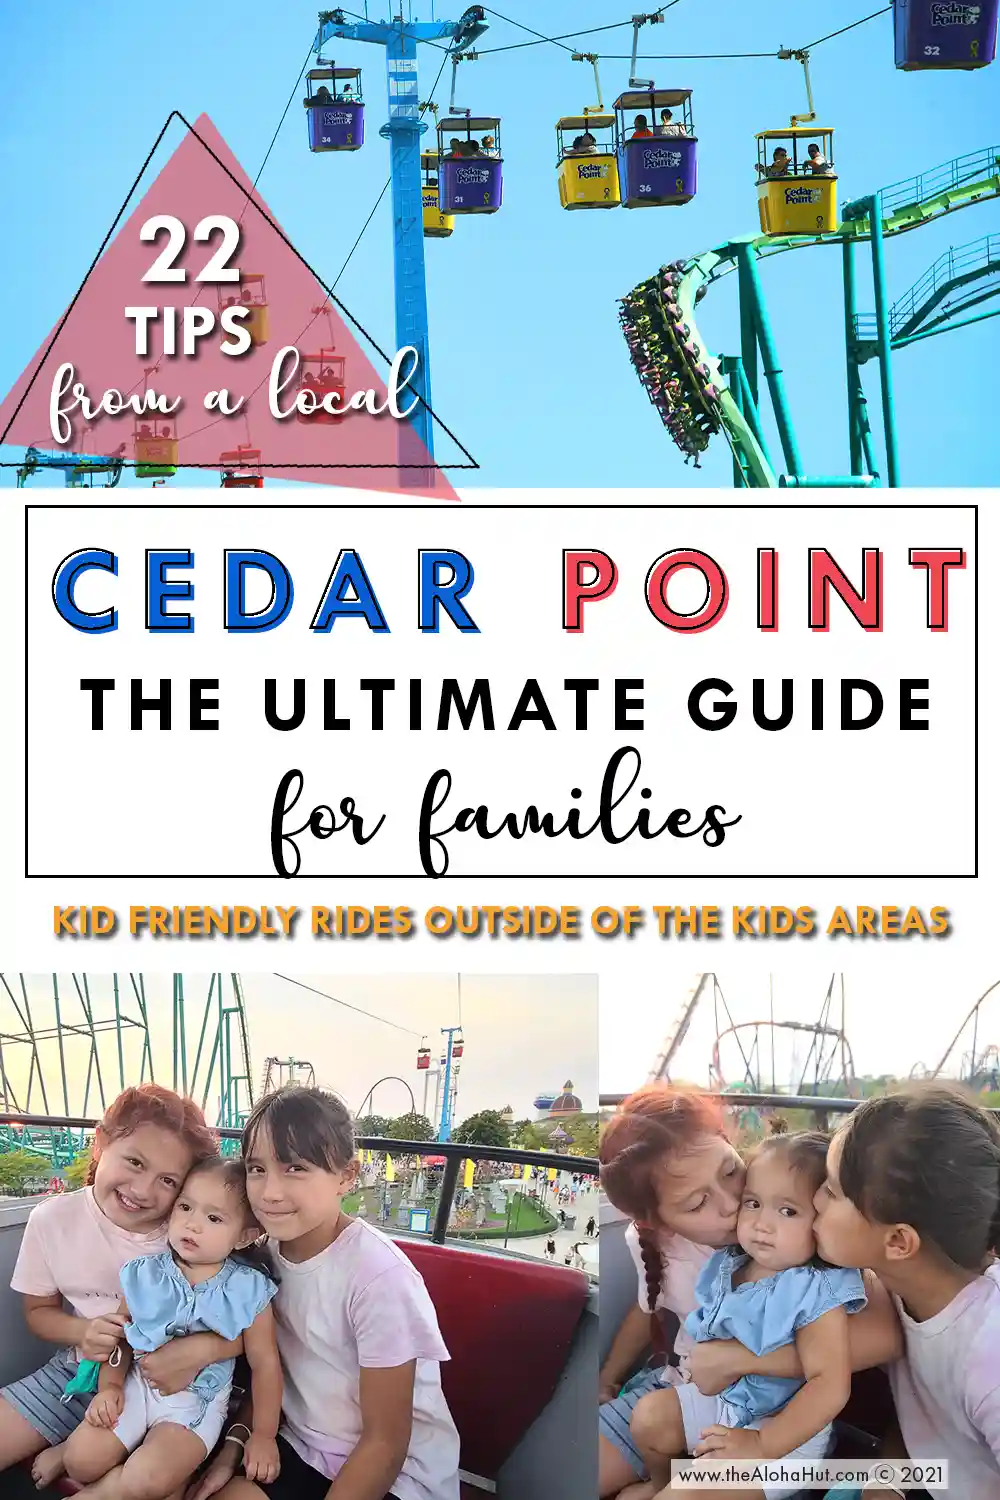 Cedar Point the Ultimate Guide for Families - Tips & Tricks - Toddler Friendly Rides